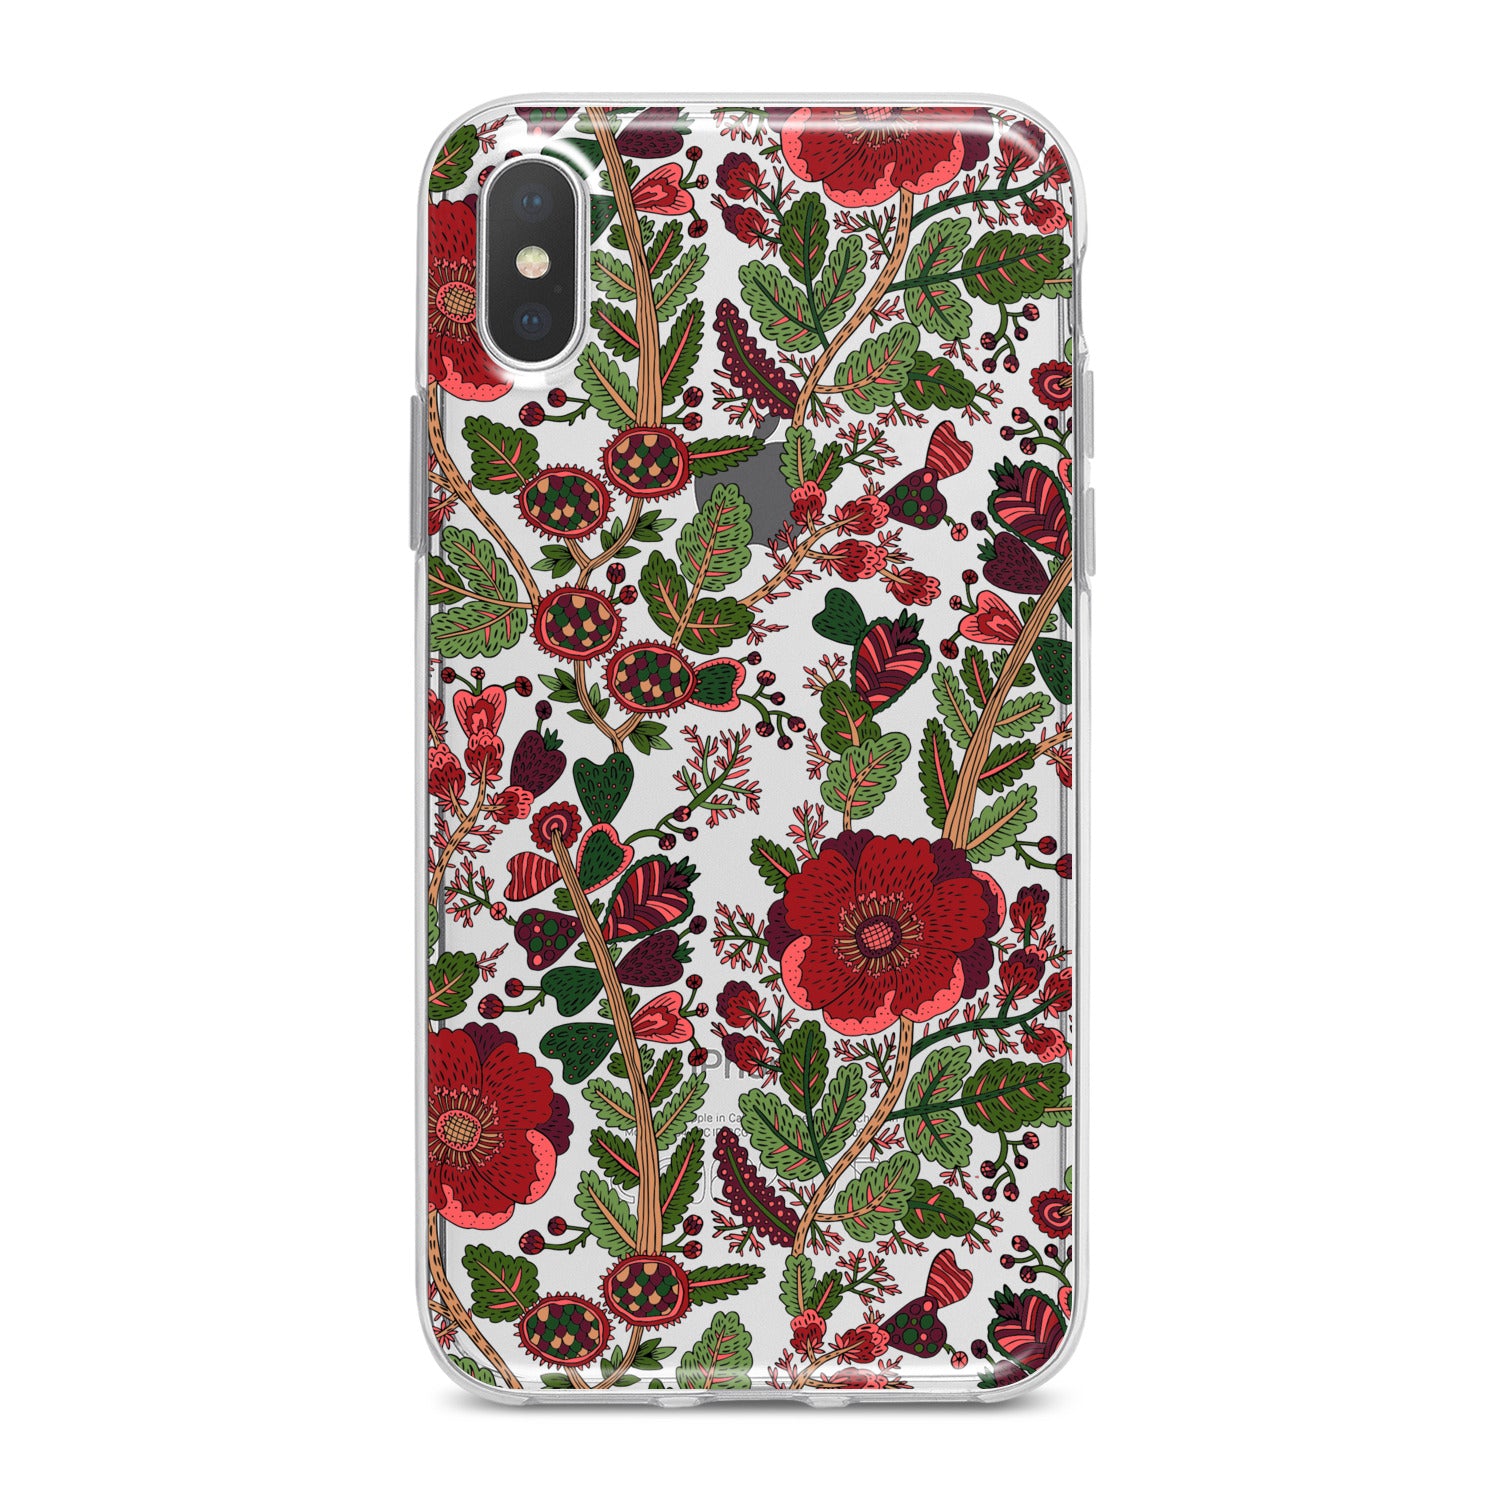 Lex Altern Drawing Red Blooming Phone Case for your iPhone & Android phone.